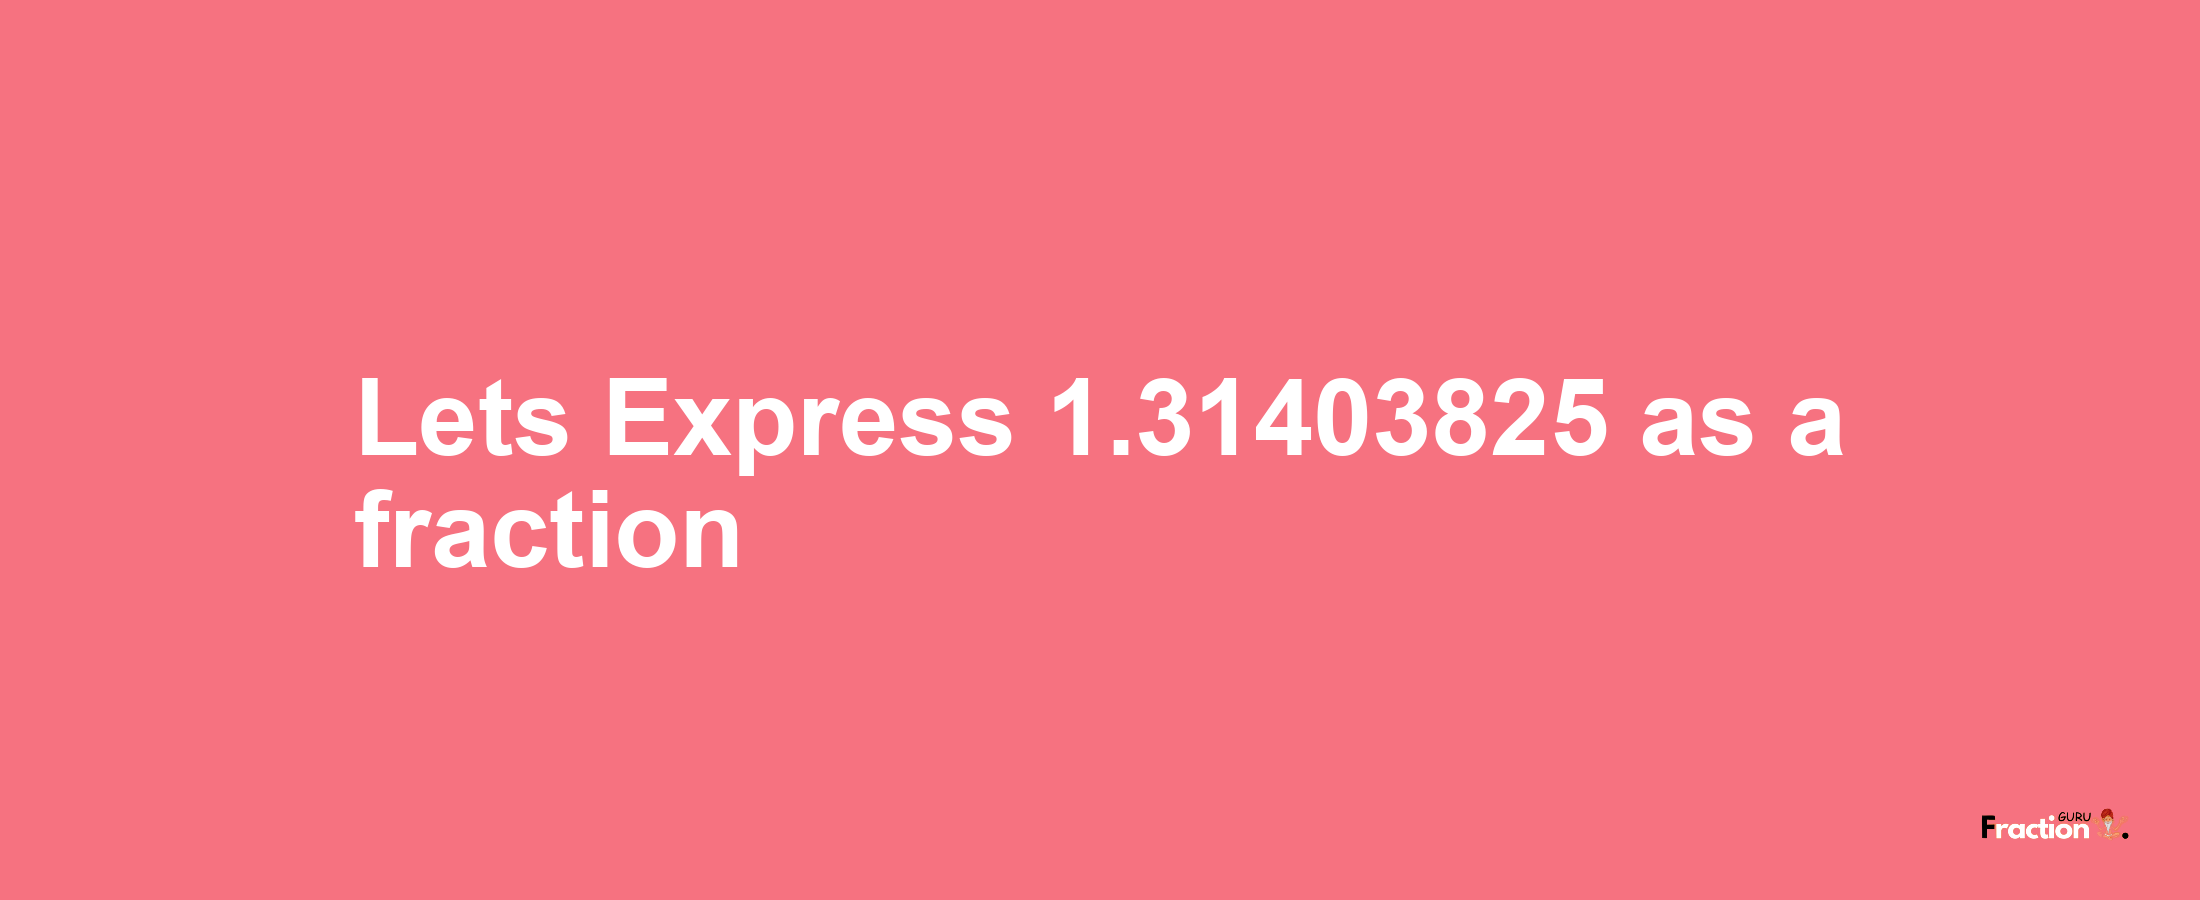 Lets Express 1.31403825 as afraction